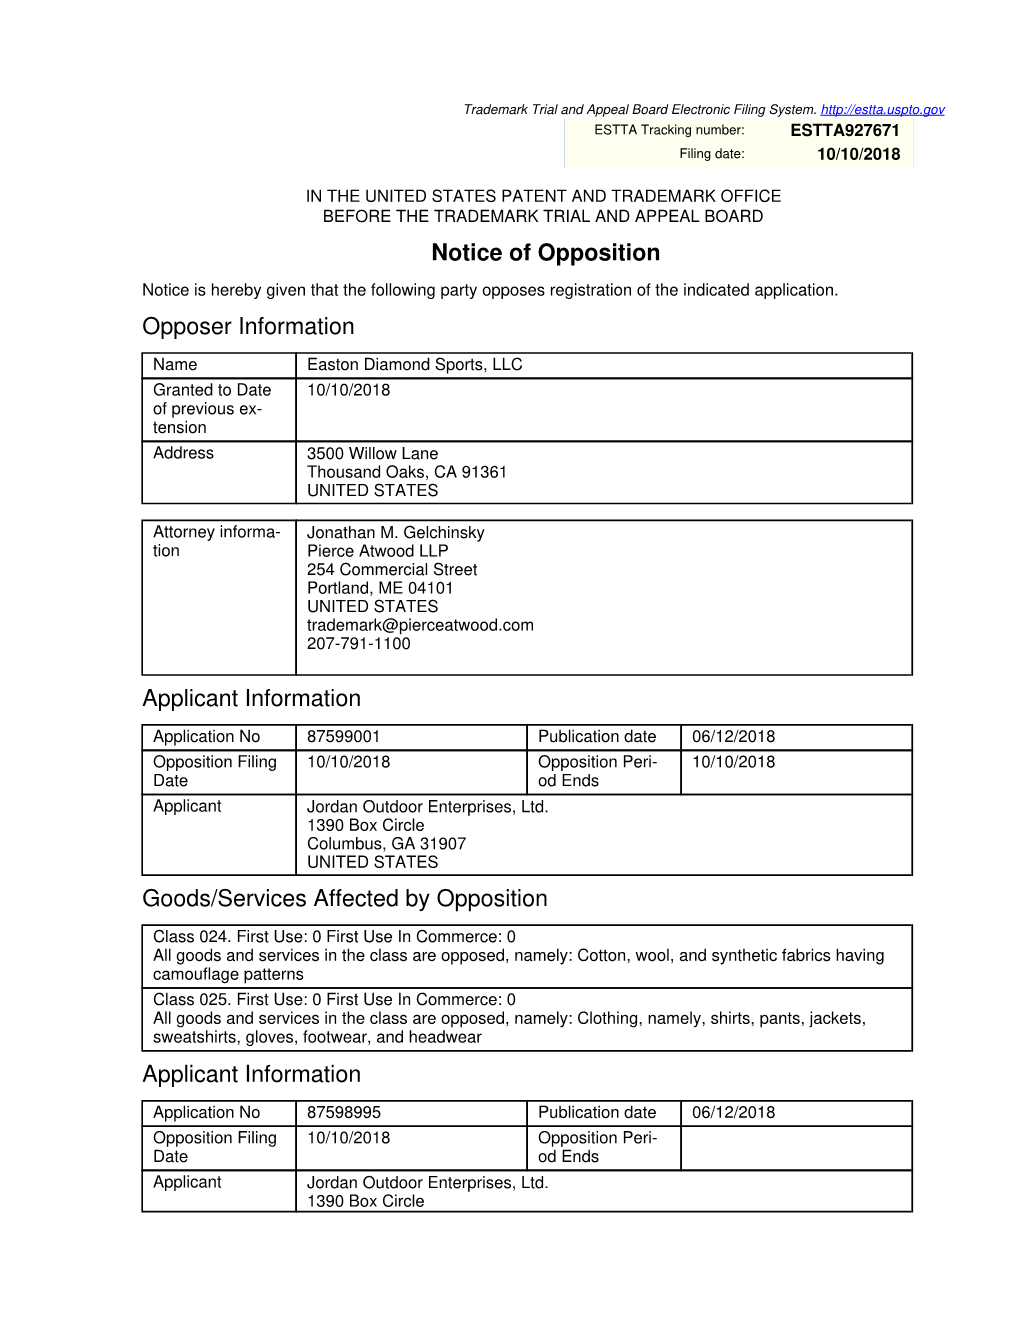 Notice of Opposition REALTREE MAKO (W6922568-3